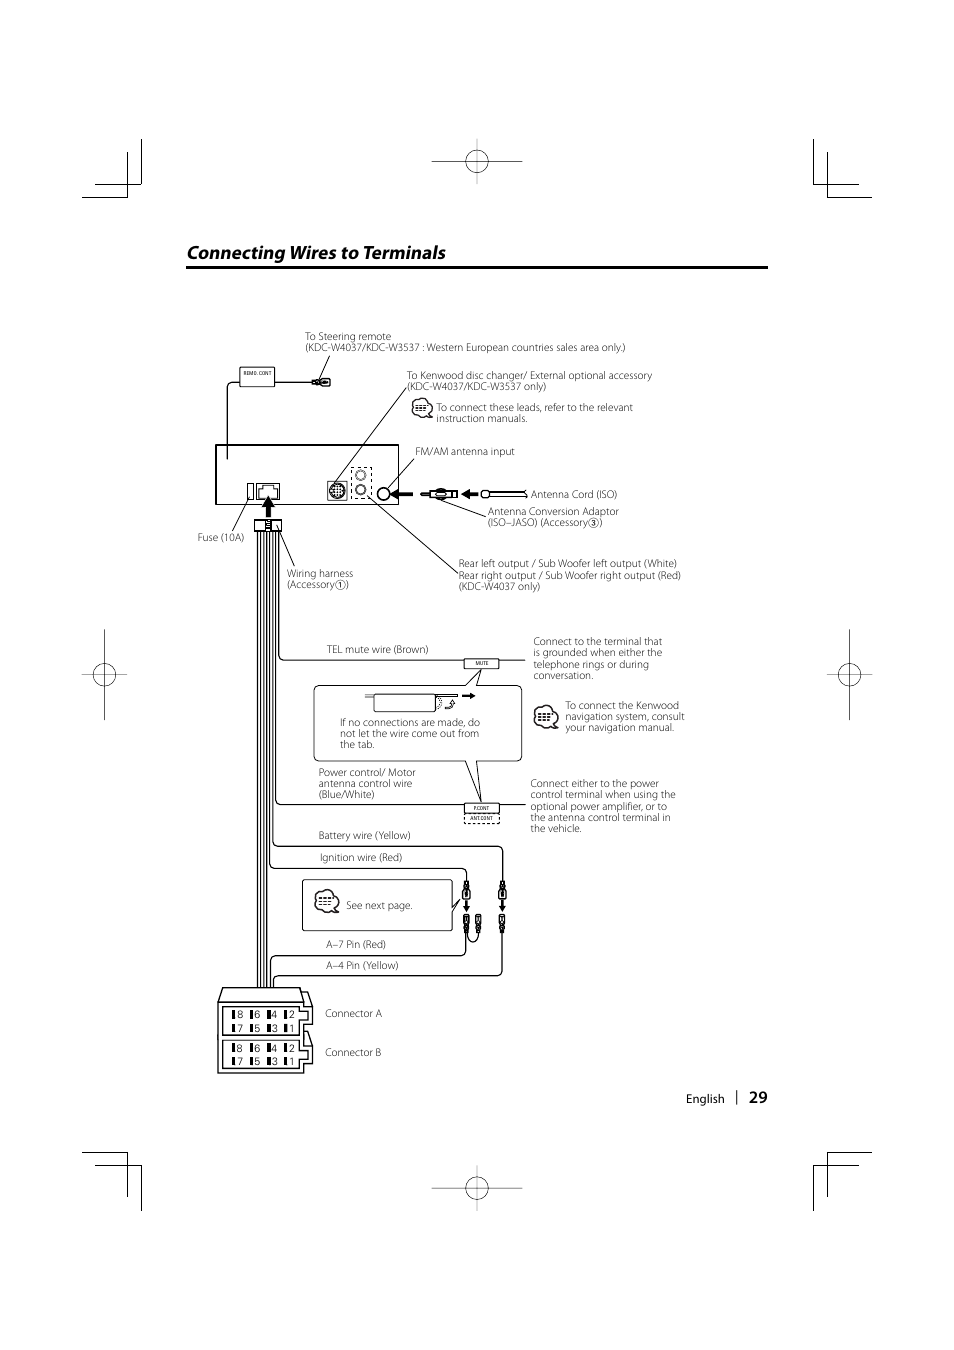 Connecting wires to terminals | Kenwood KDC-W311 User Manual | Page 29 / 36  | Original mode